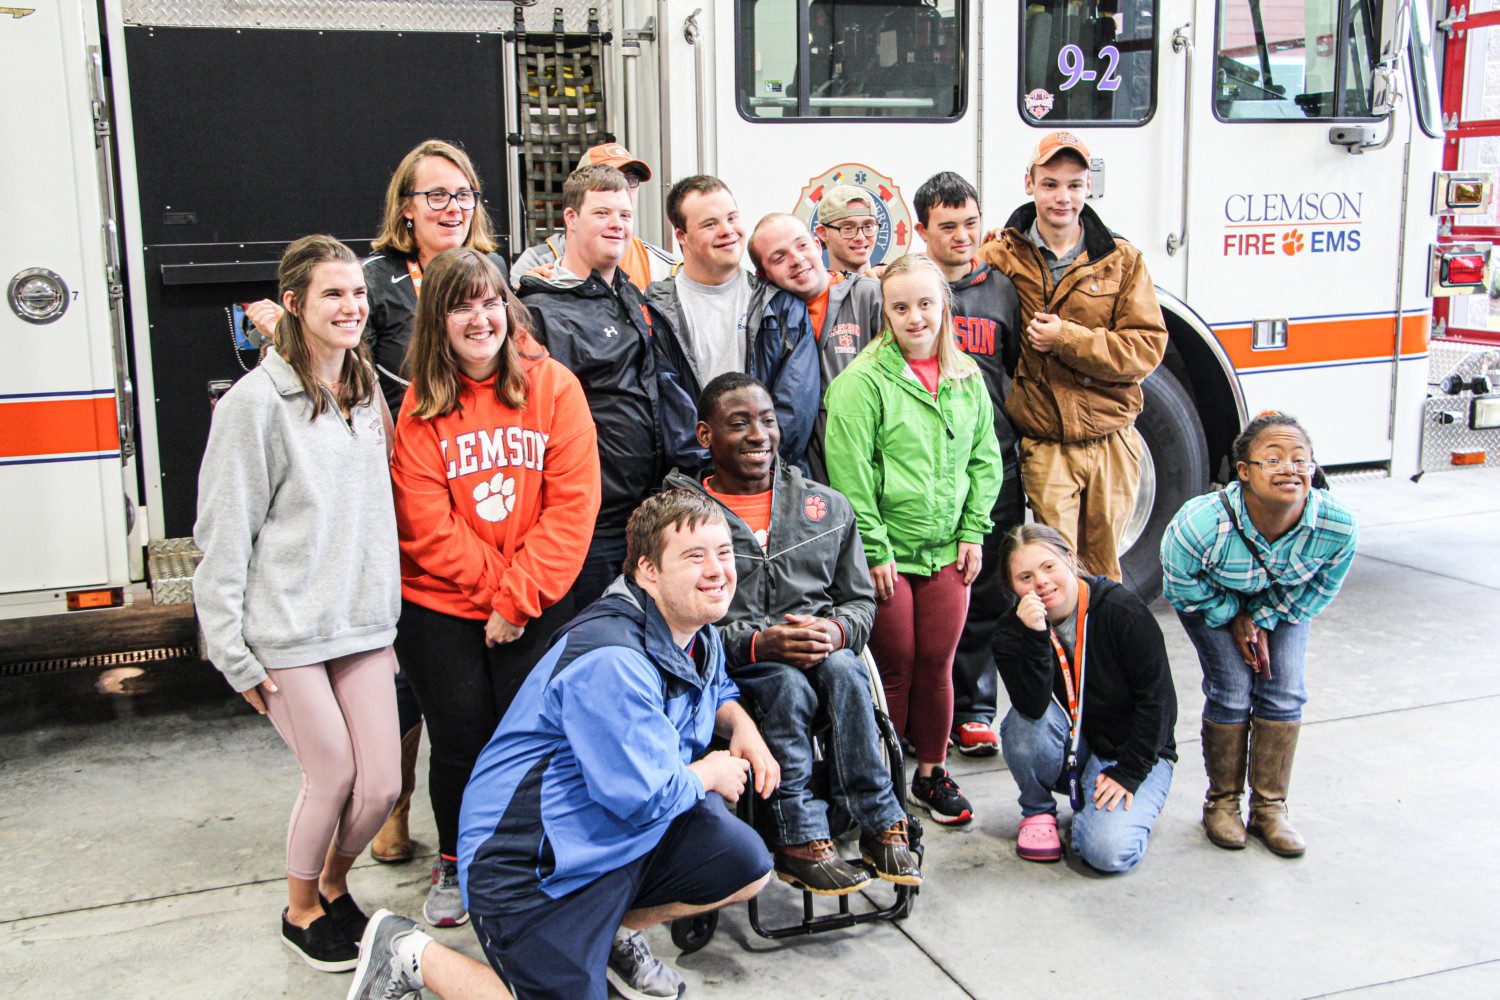 Members of ClemsonLIFE pose in front of a fire engine at Station No. 2 in Clemson on Wednesday, Oct. 30